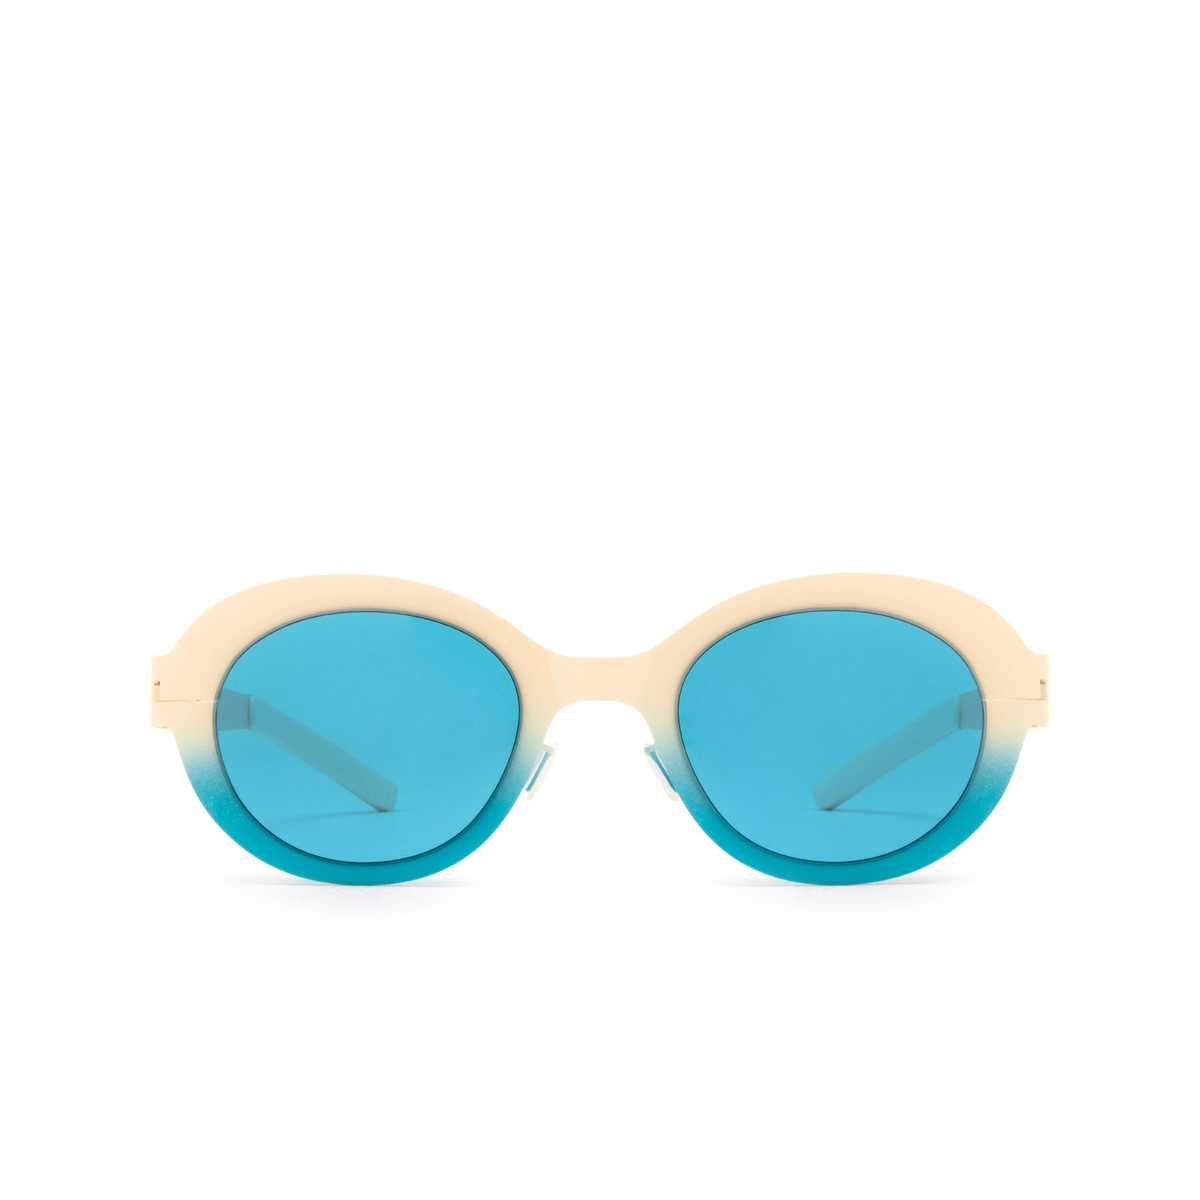 Mykita FOCUS Sunglasses 562 Chantilly White/Turquoise - front view